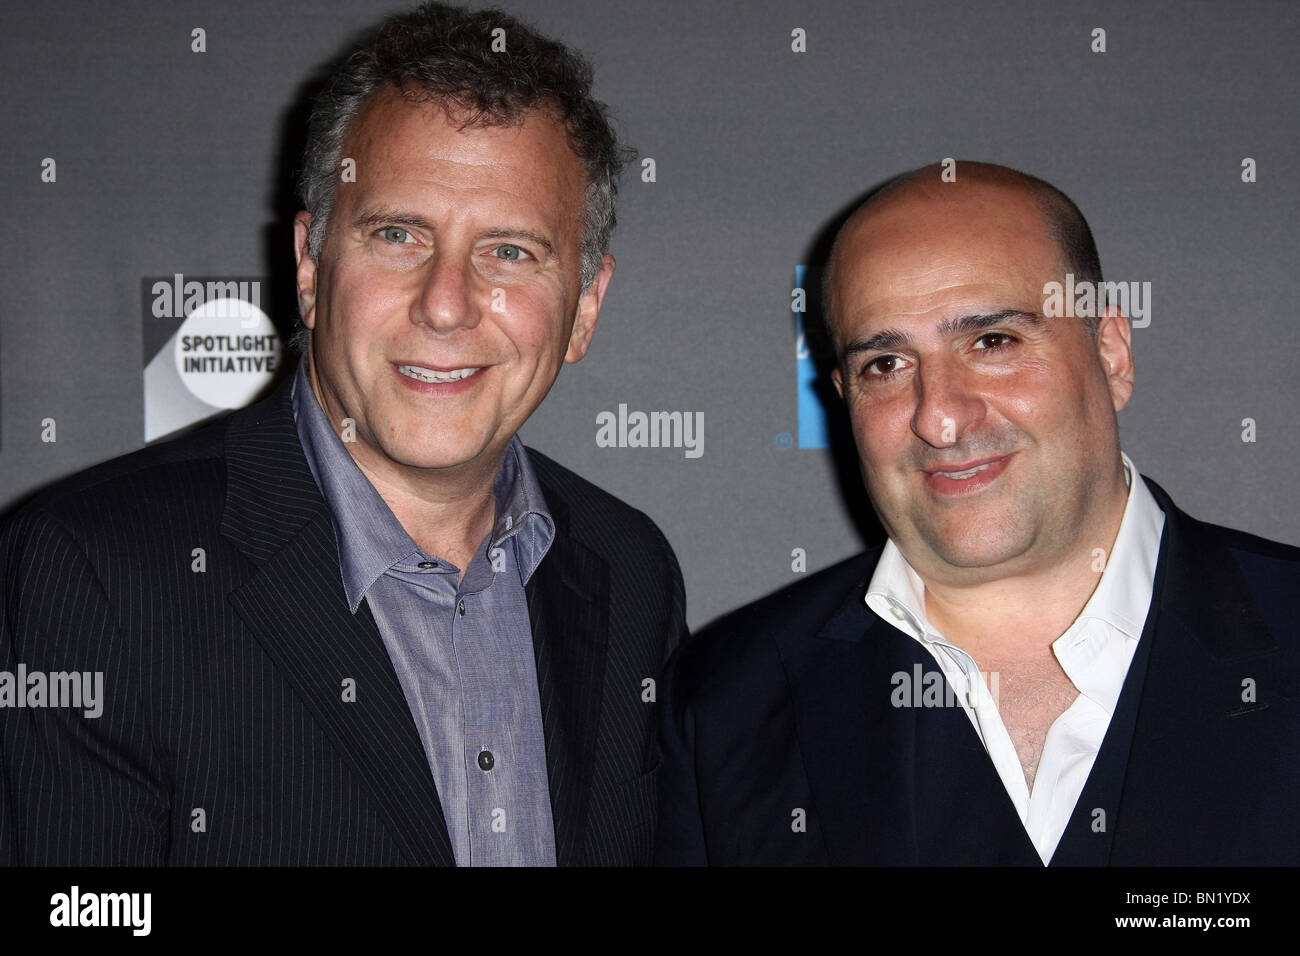 PAUL REISER OMID DJALILI THE CREATIVE COALITION PRESENTS THE PREMIERE OF THE INFIDEL HOLLYWOOD LOS ANGELES CA 23 June 2010 Stock Photo